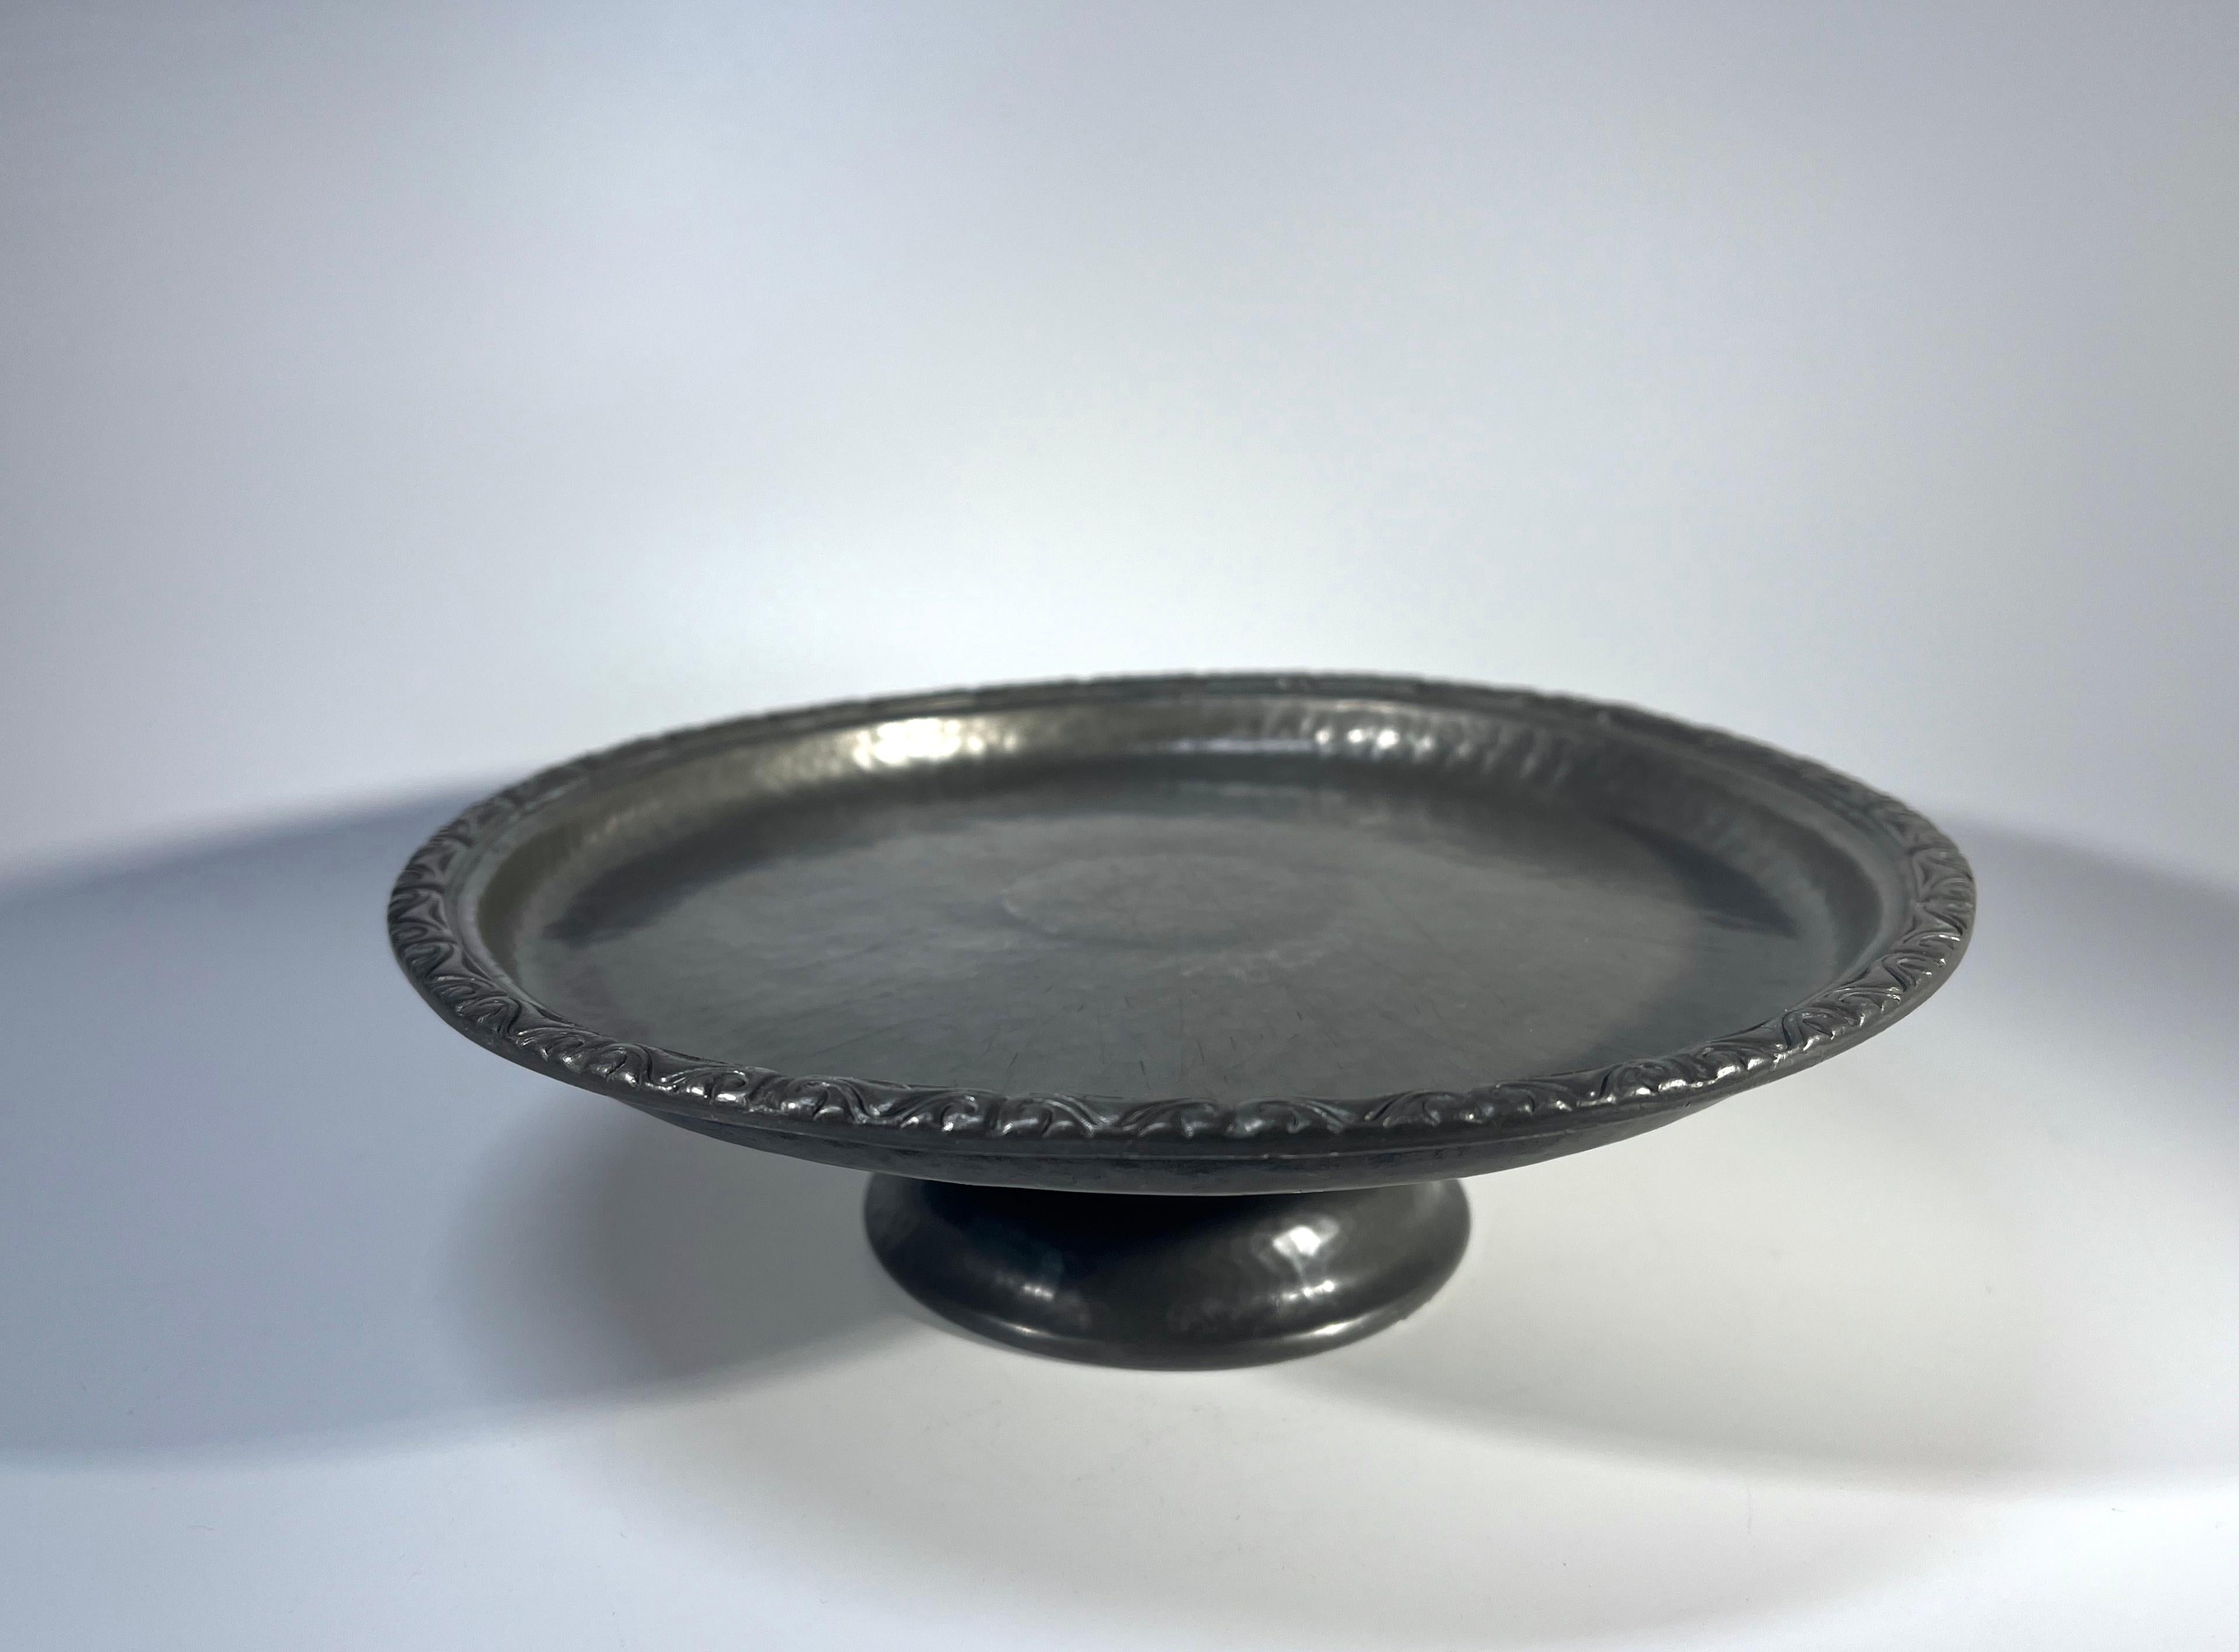 Art Nouveau Footed Tray Made By Liberty & Co., English Hammered Antique Pewter  In Good Condition For Sale In Rothley, Leicestershire